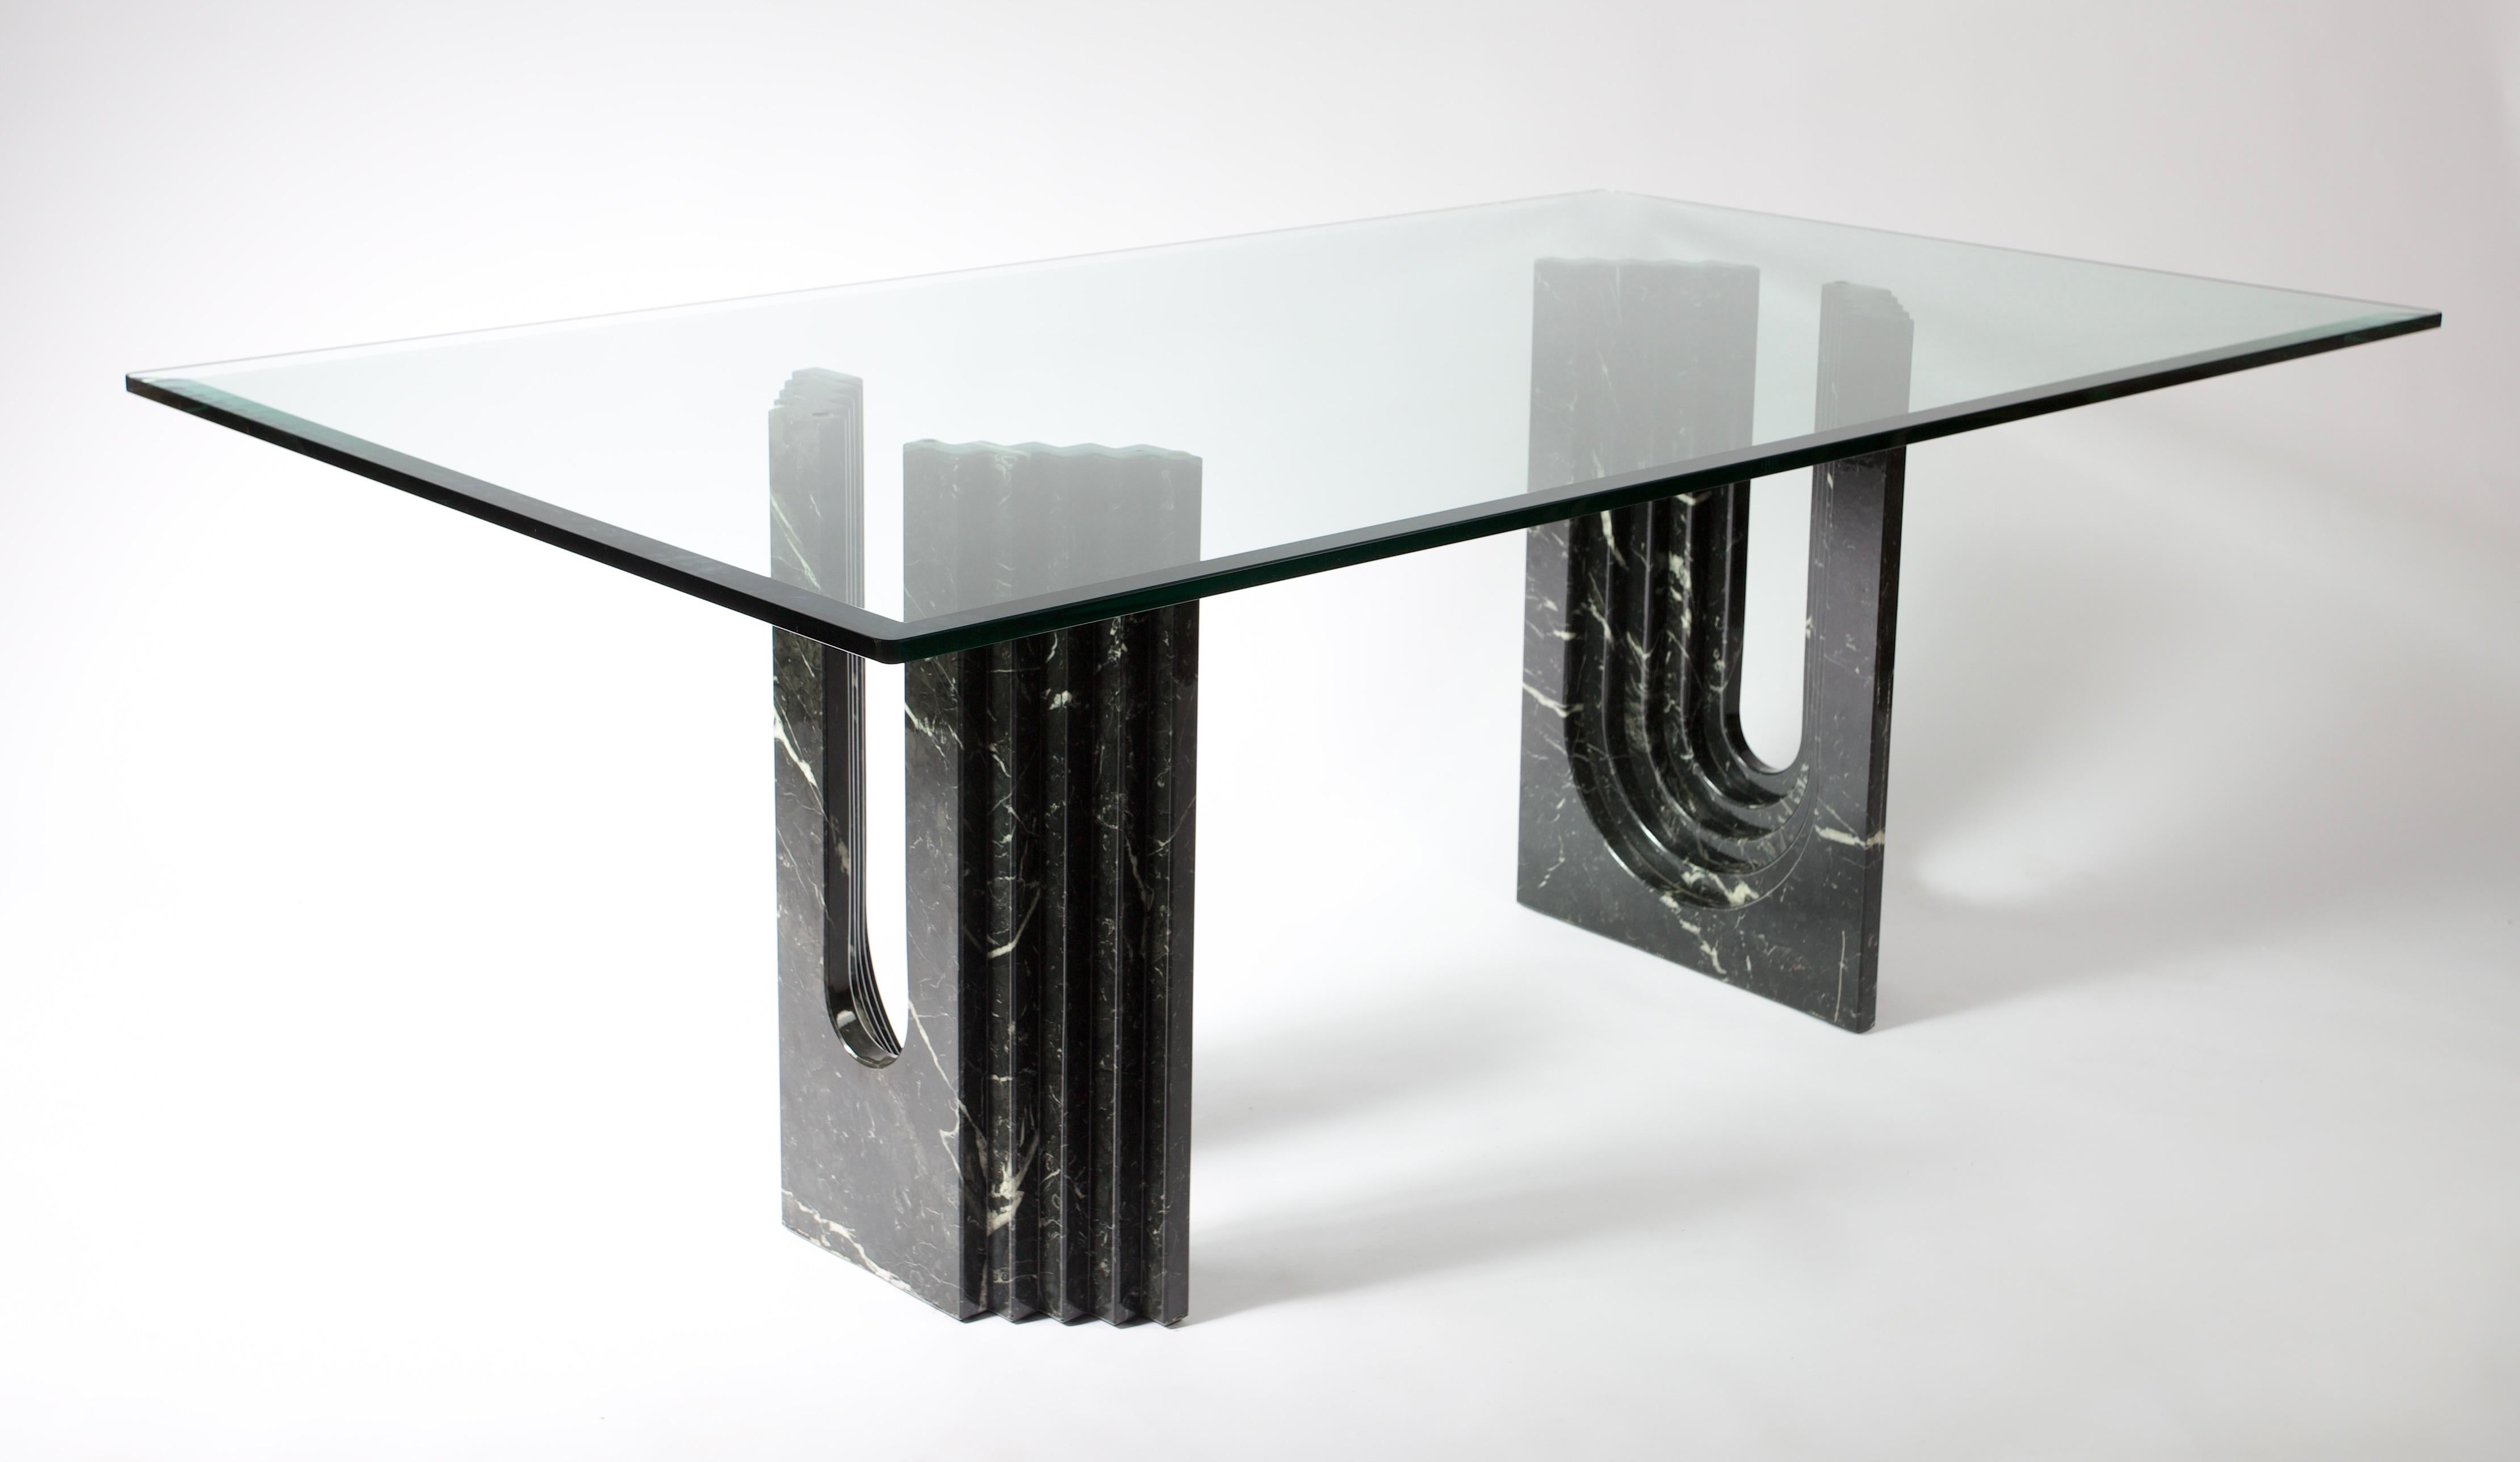 Carlo Scarpa postmodern black madagascar dining table, 1970's. Carlo Scarpa was a famous Italian furniture designer and architect, influenced by the materials, landscape and history of Venetian culture and Japan.  He designed this table for Giorgio